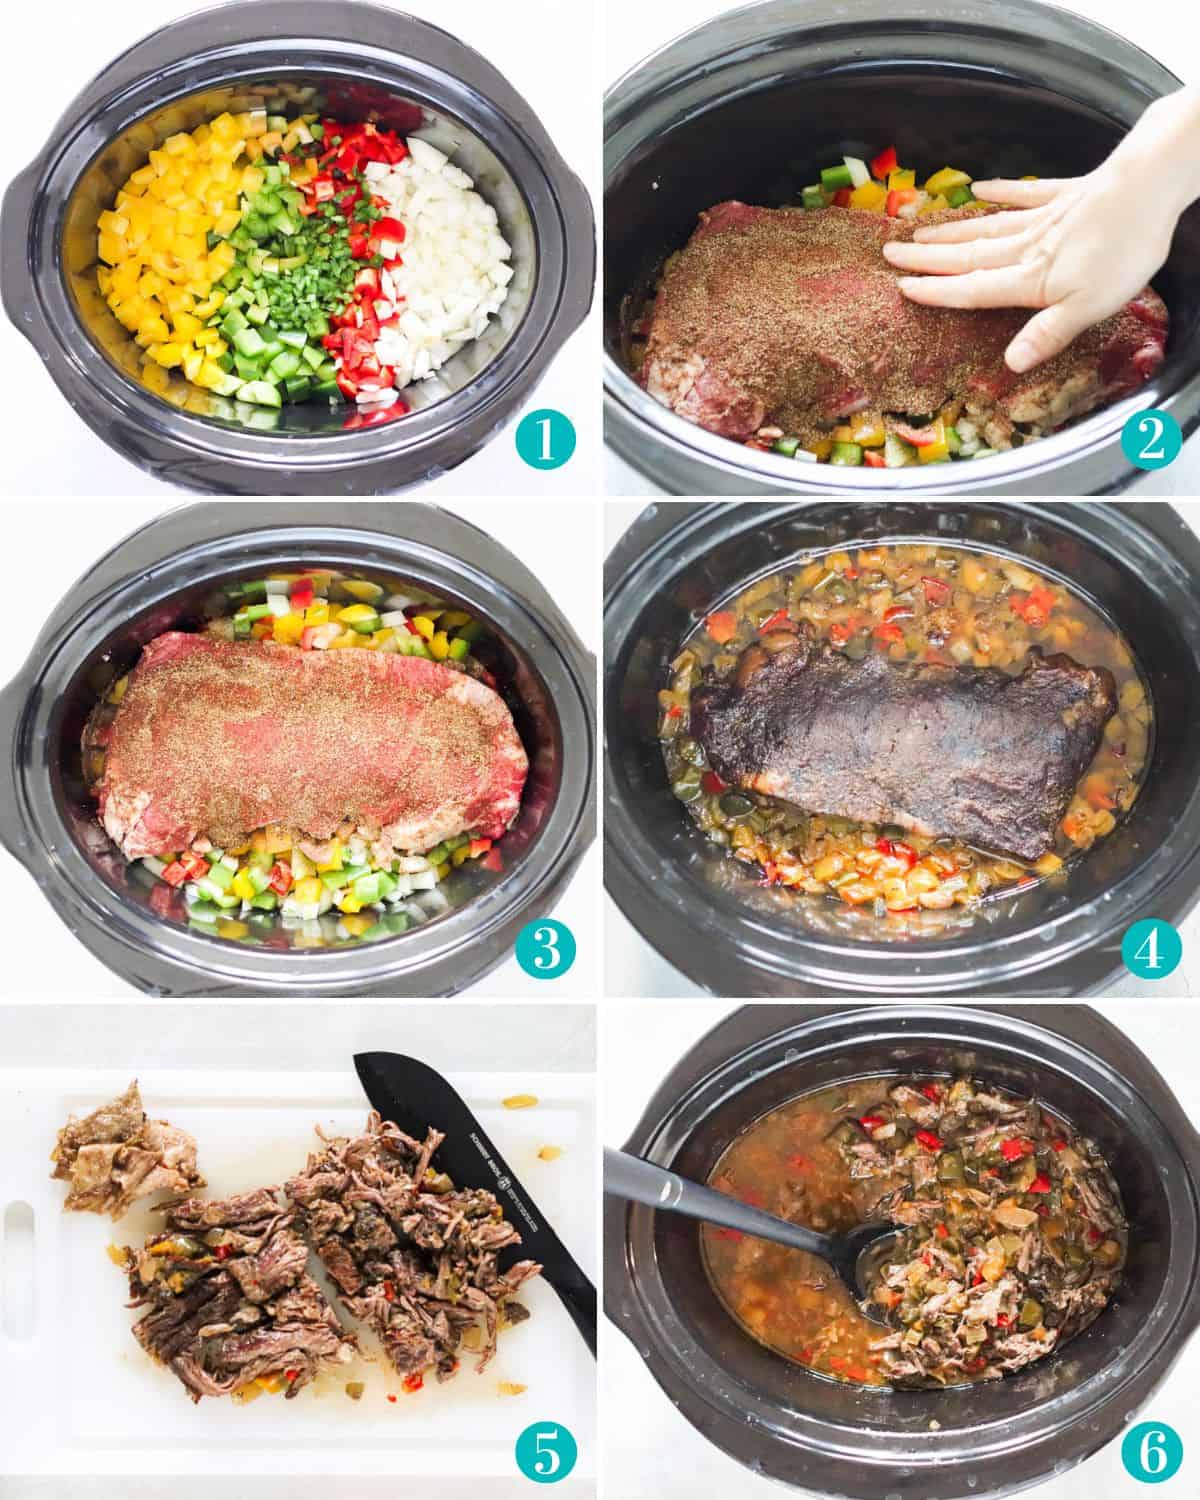 six photo collage with peppers and onions in a slow cooker, a hand patting spices on a steak in a slow cooker, the steak in the crockpot, steak and peppers cooked in the crockpot, cooked beef carnitas on a cutting board, and cooked steak and peppers after cooking in the slow cooker.